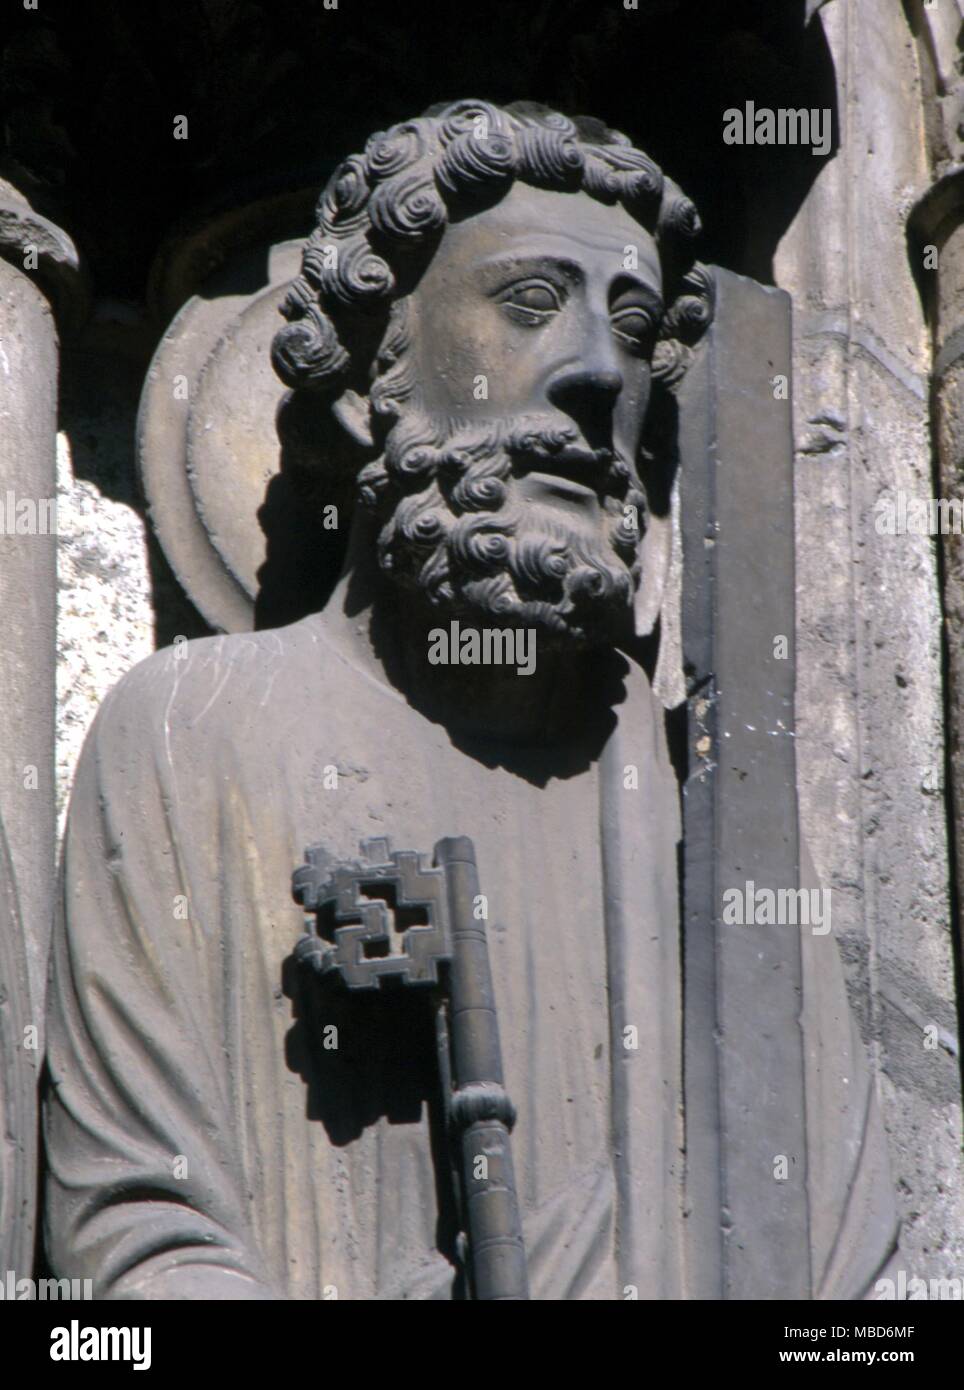 SAINTS - ST PETER - Statue of St Peter with the key attribute, on the south portal of Chartres cathedral. Stock Photo